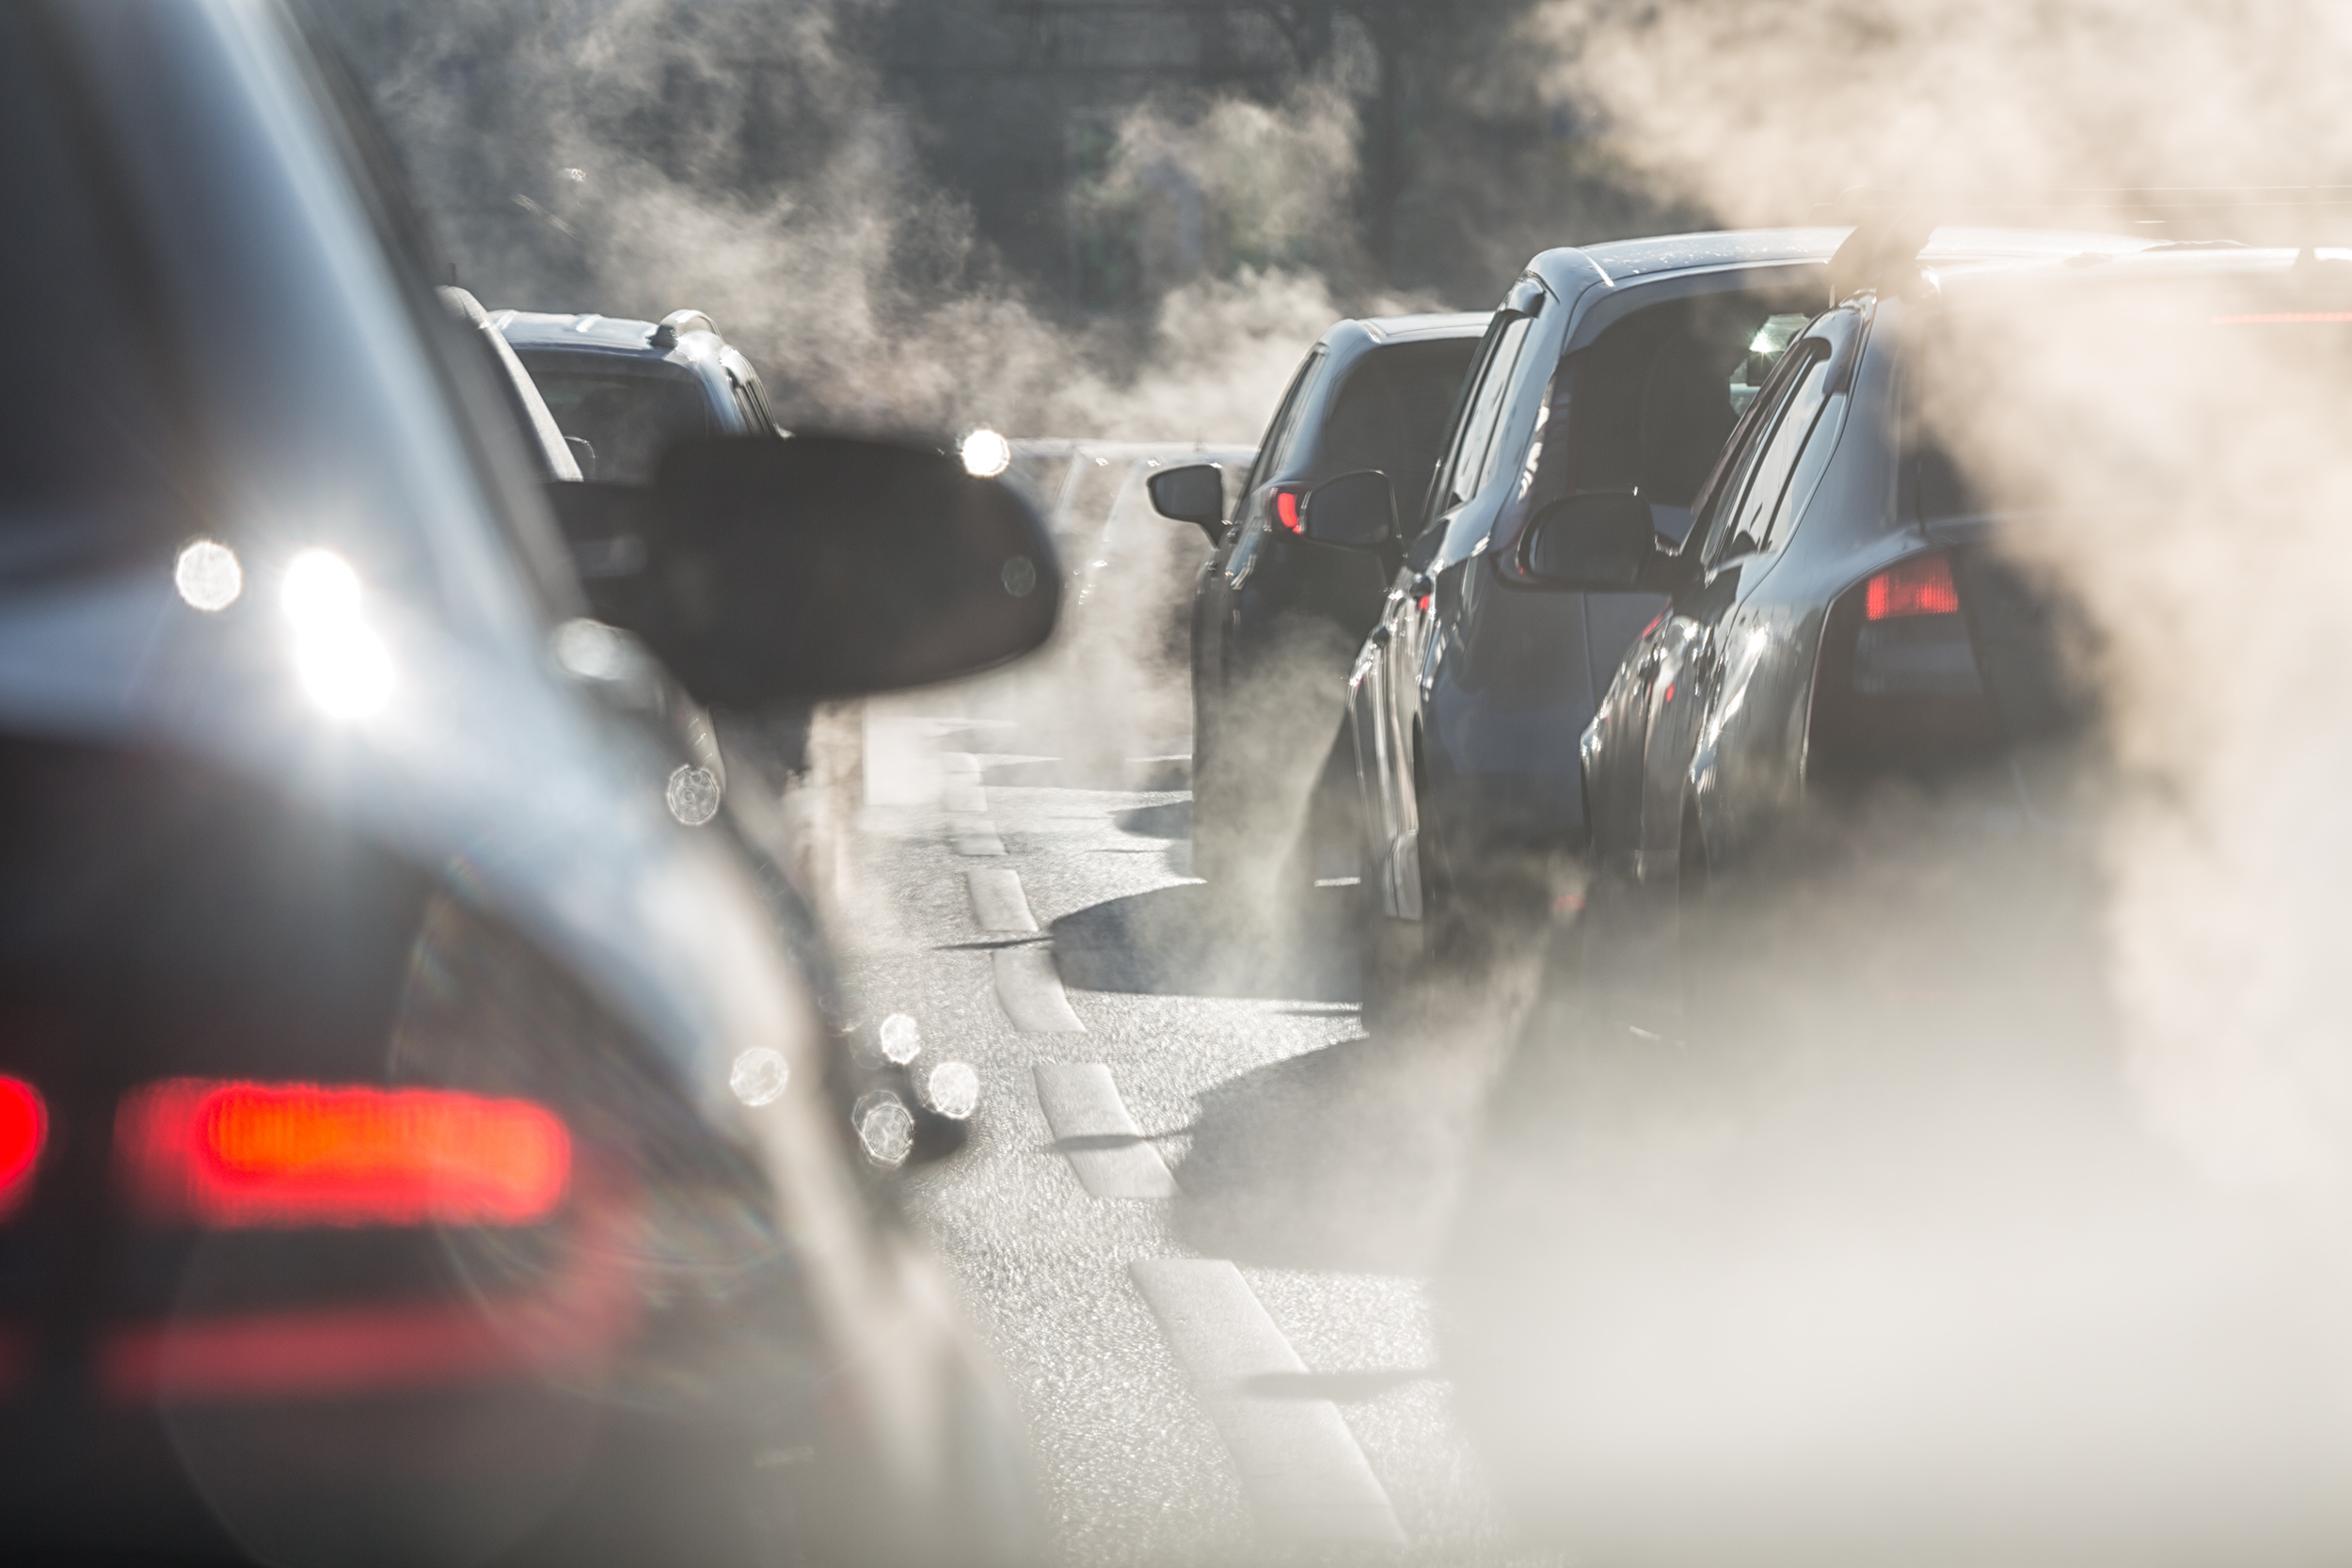 Pollution voiture : causes, normes, solutions